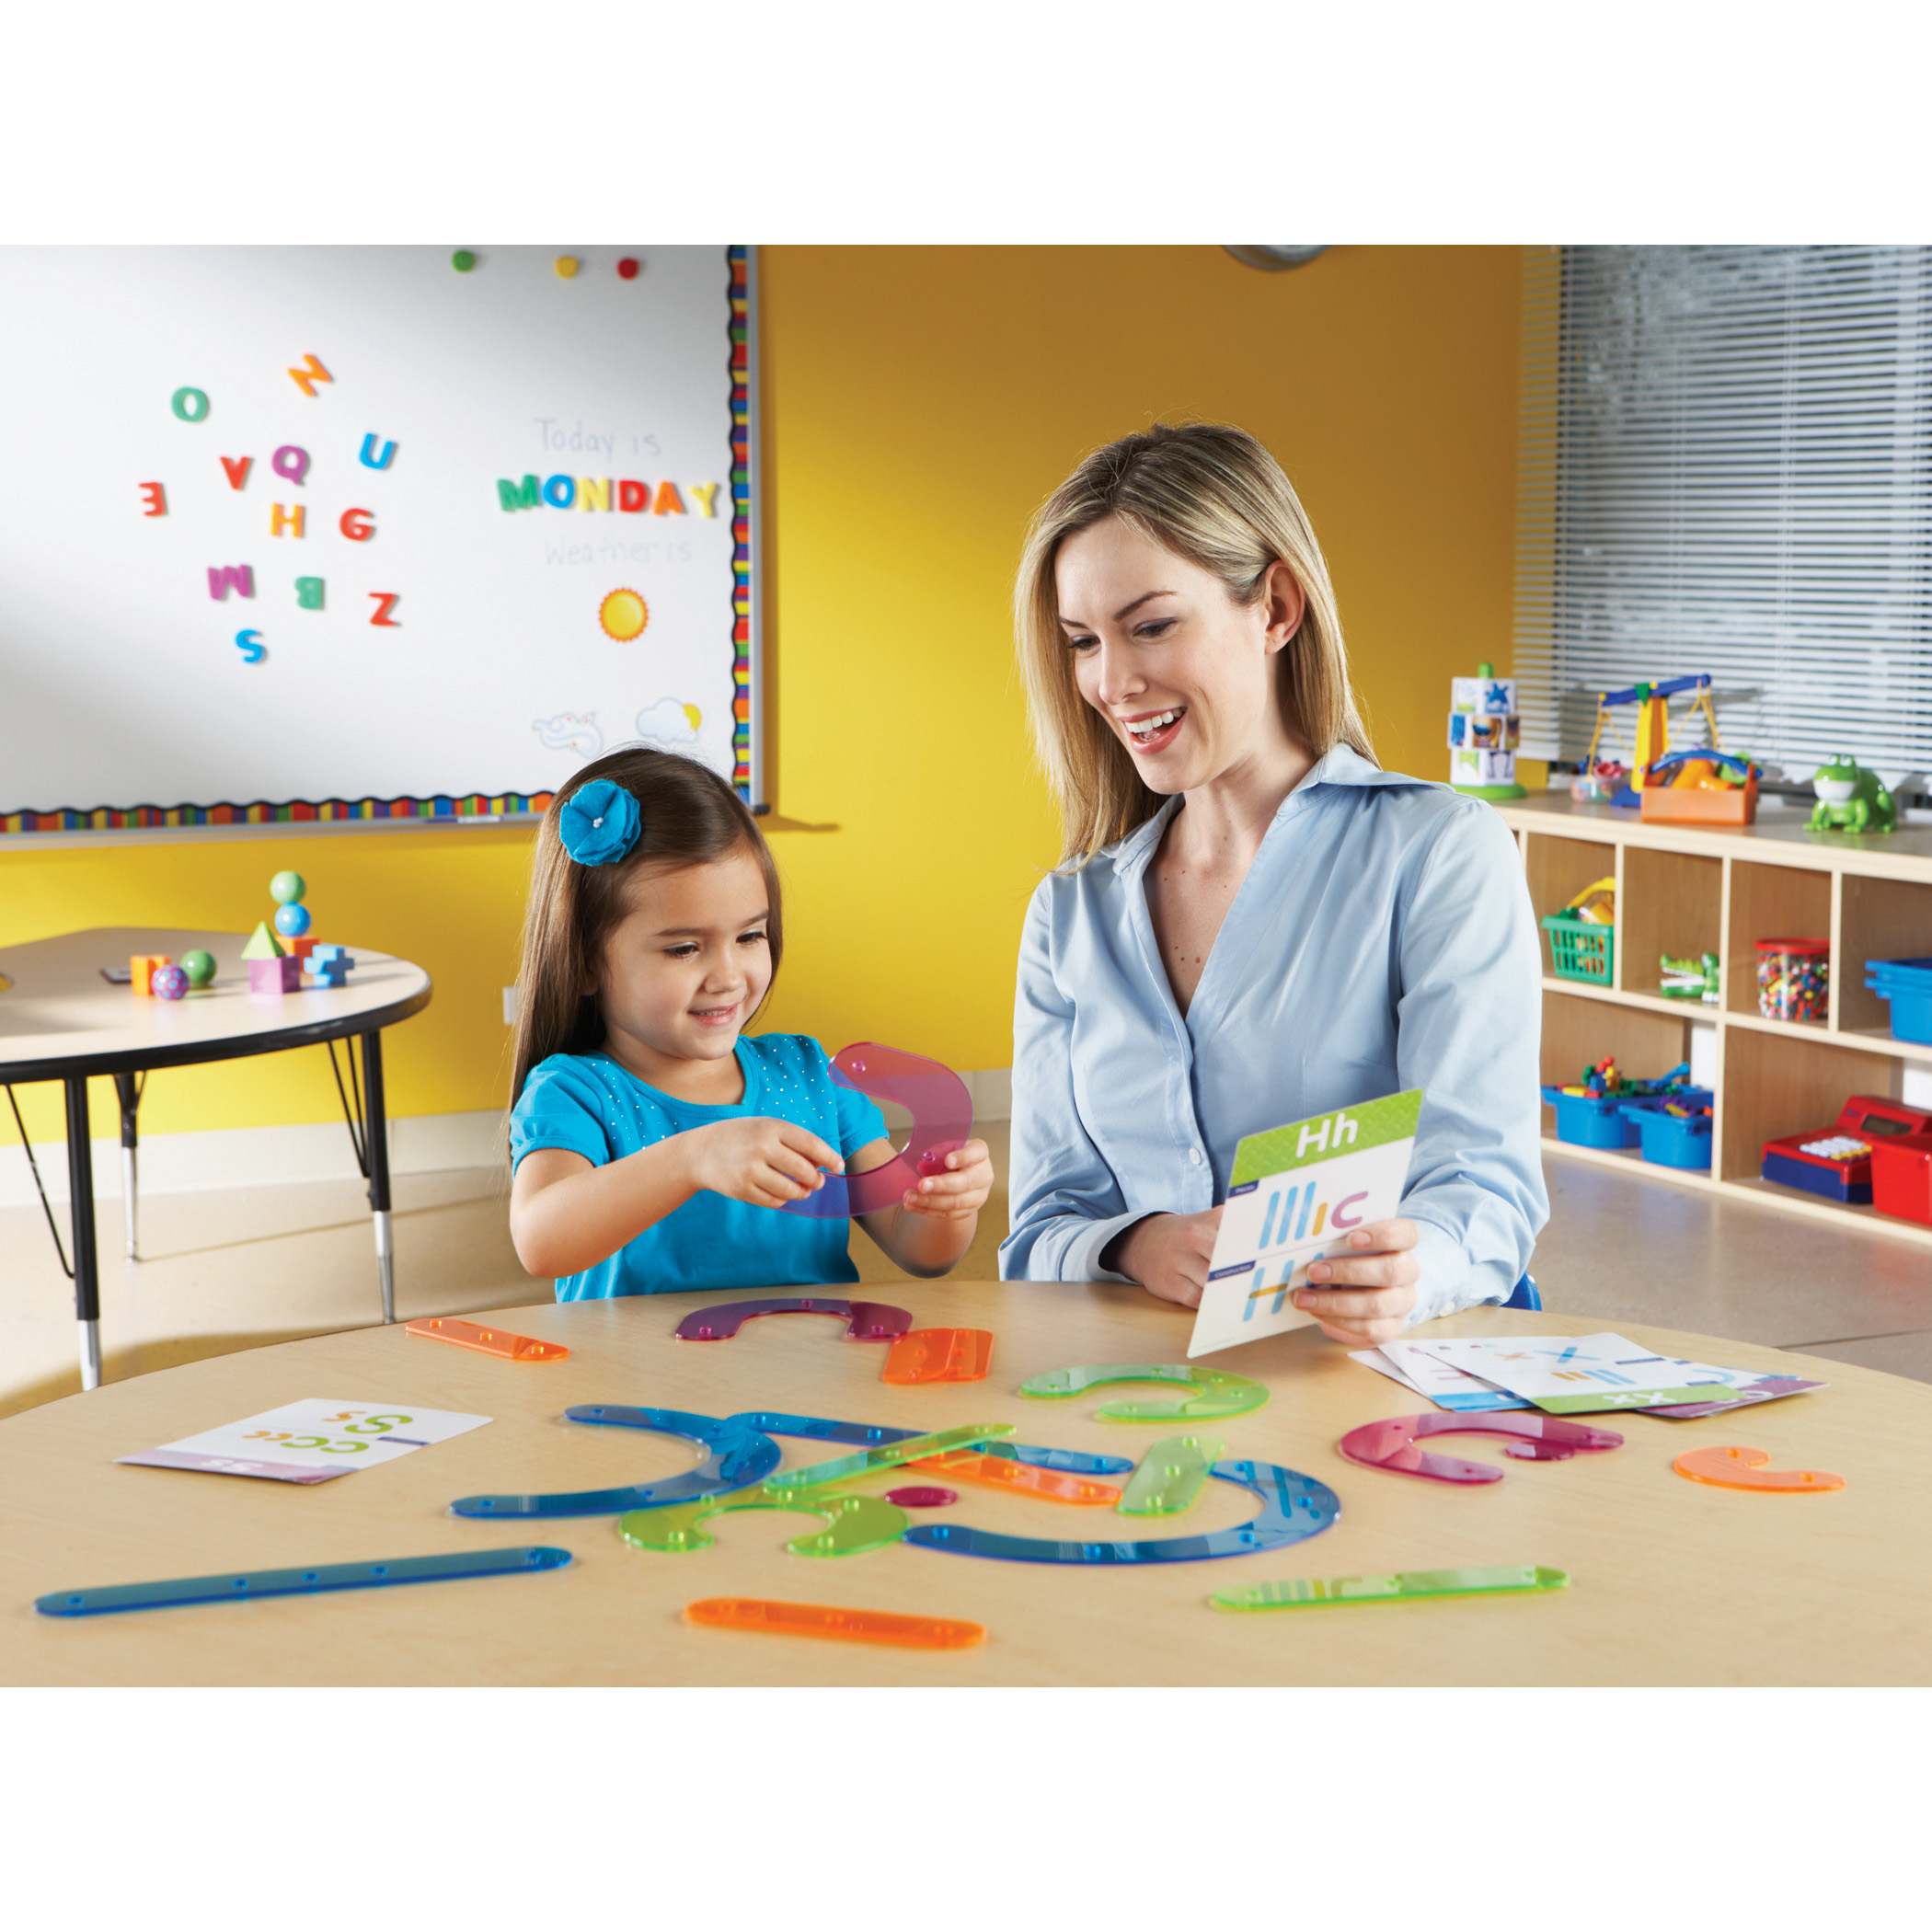 Learning Resources Letter Construction Activity Set image number null